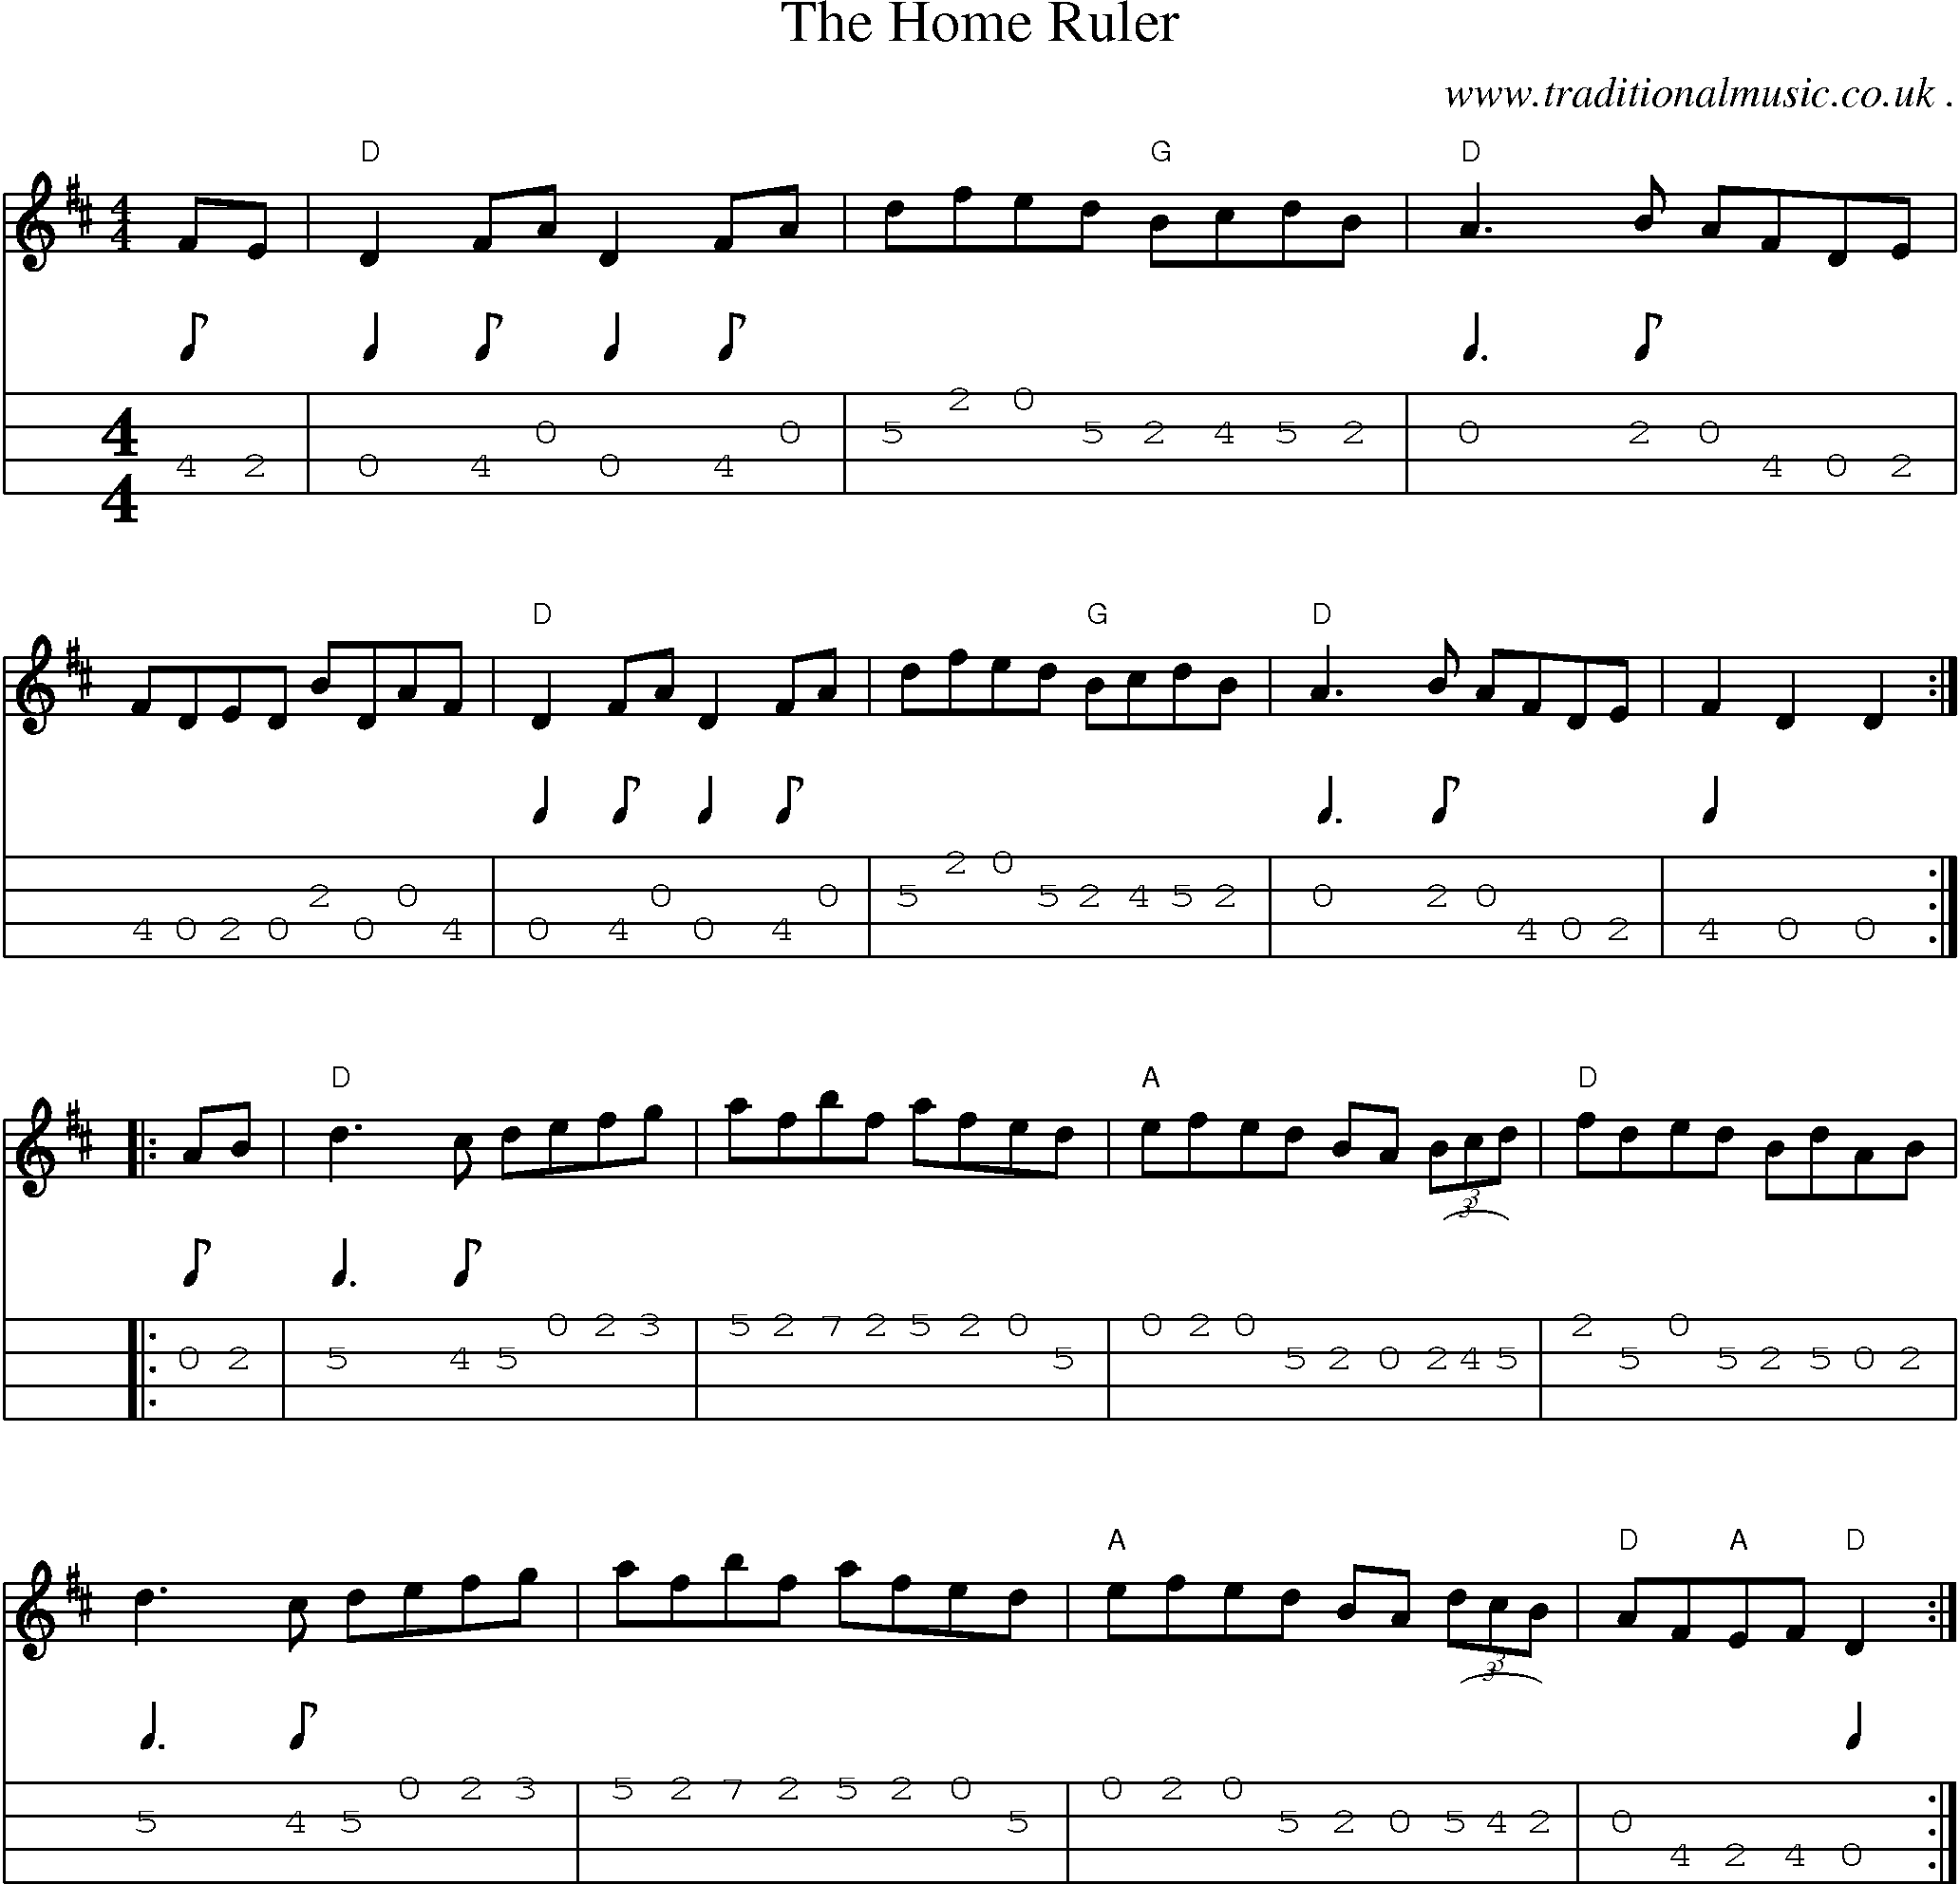 Music Score and Guitar Tabs for The Home Ruler